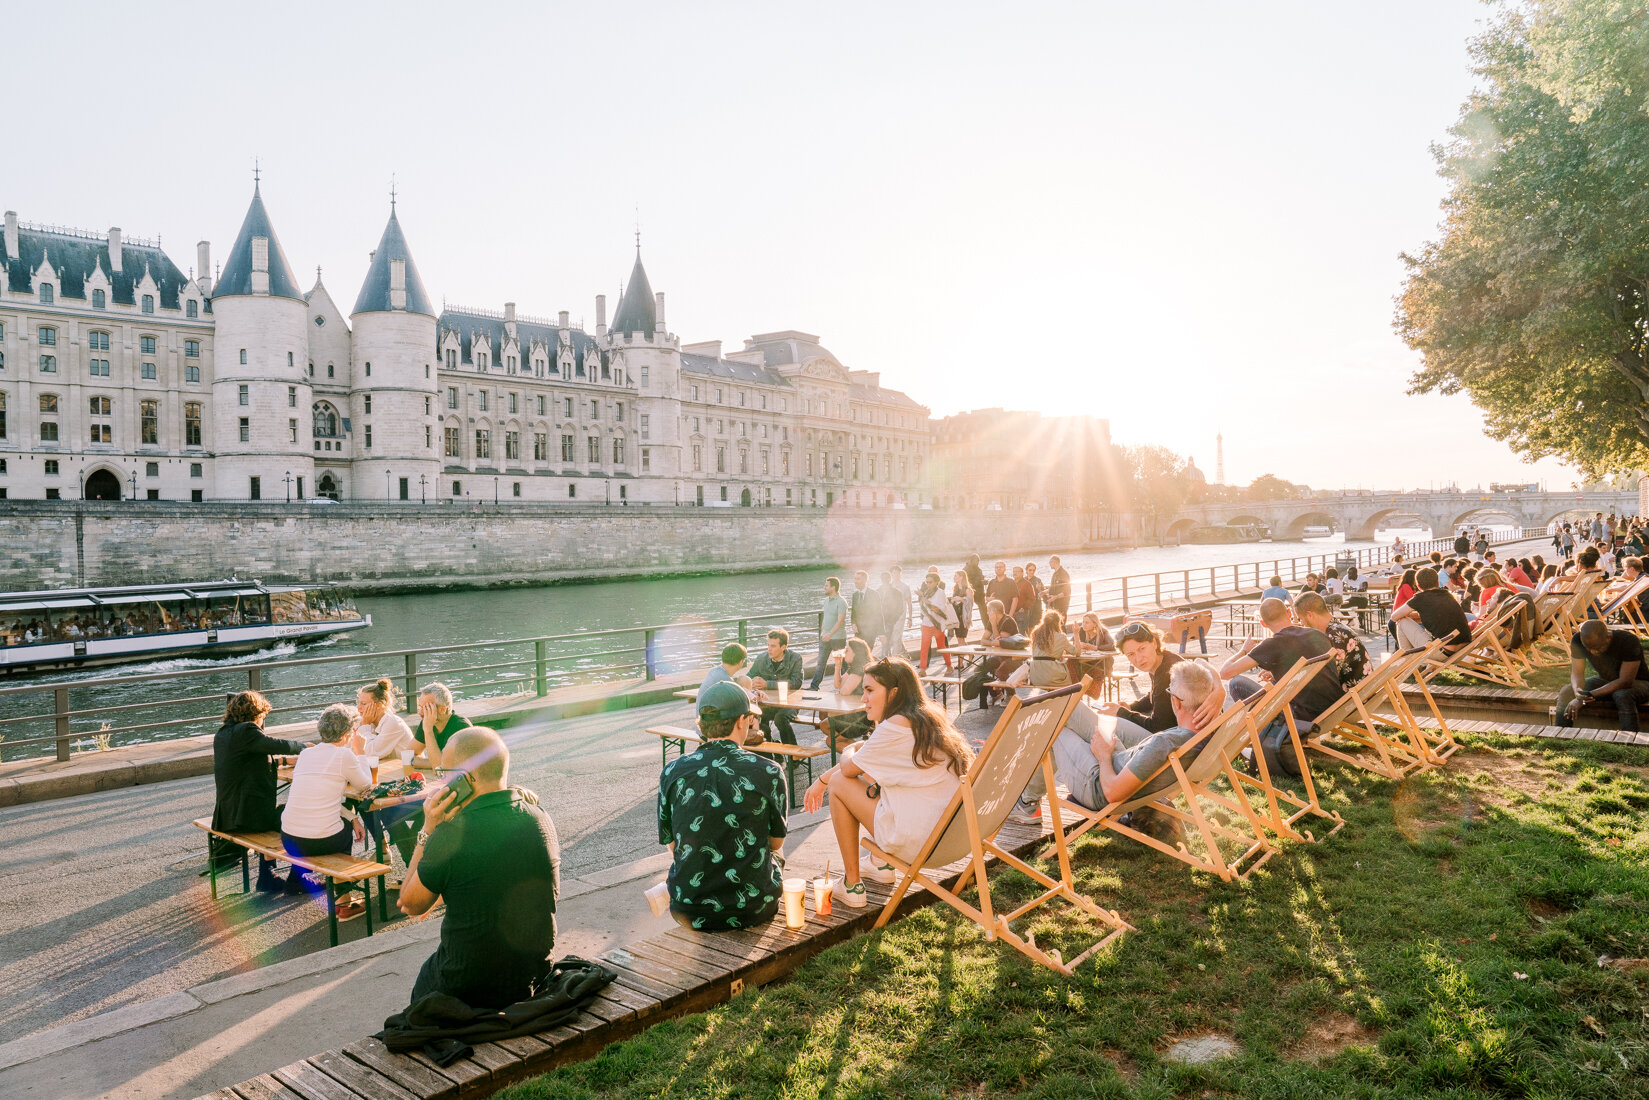  Paris street scene: People enjoying after work drinks or workouts by the Seine 